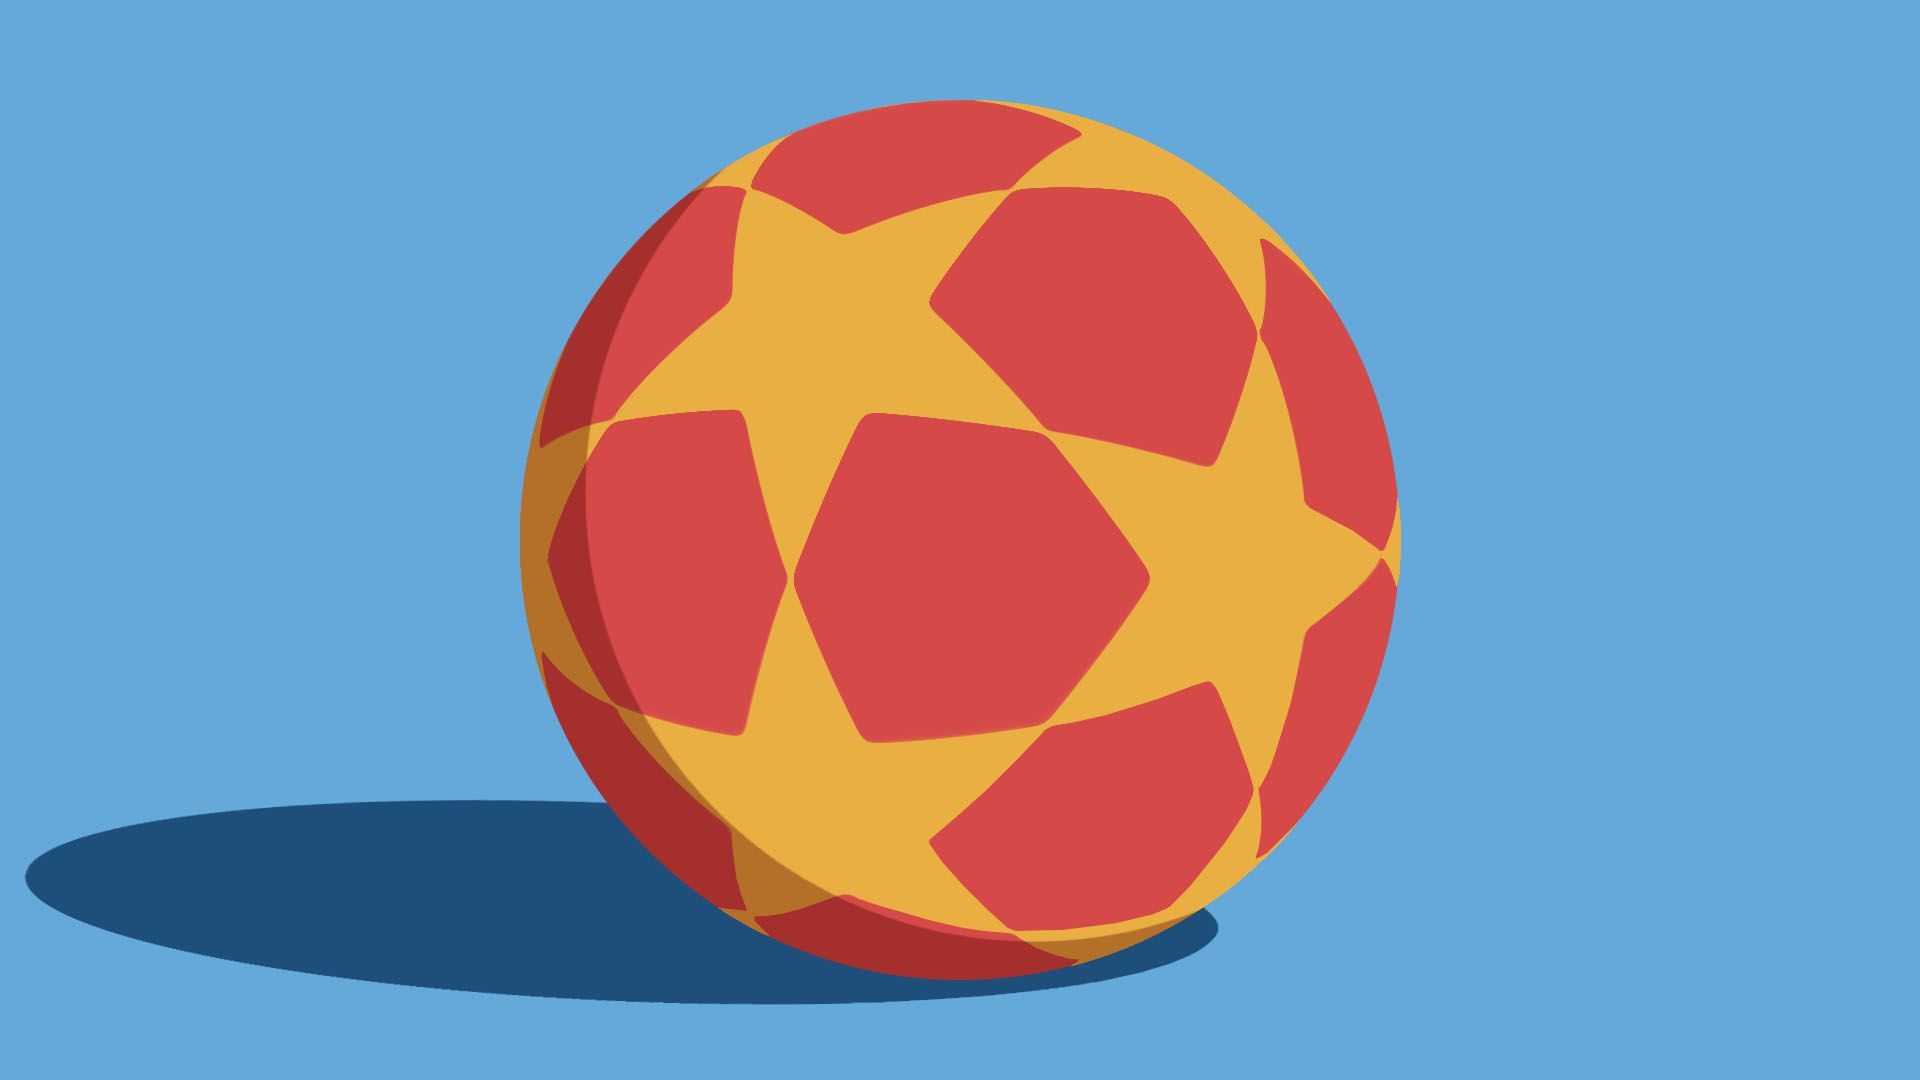 Illustration of a soccer ball that resembles the Chinese flag